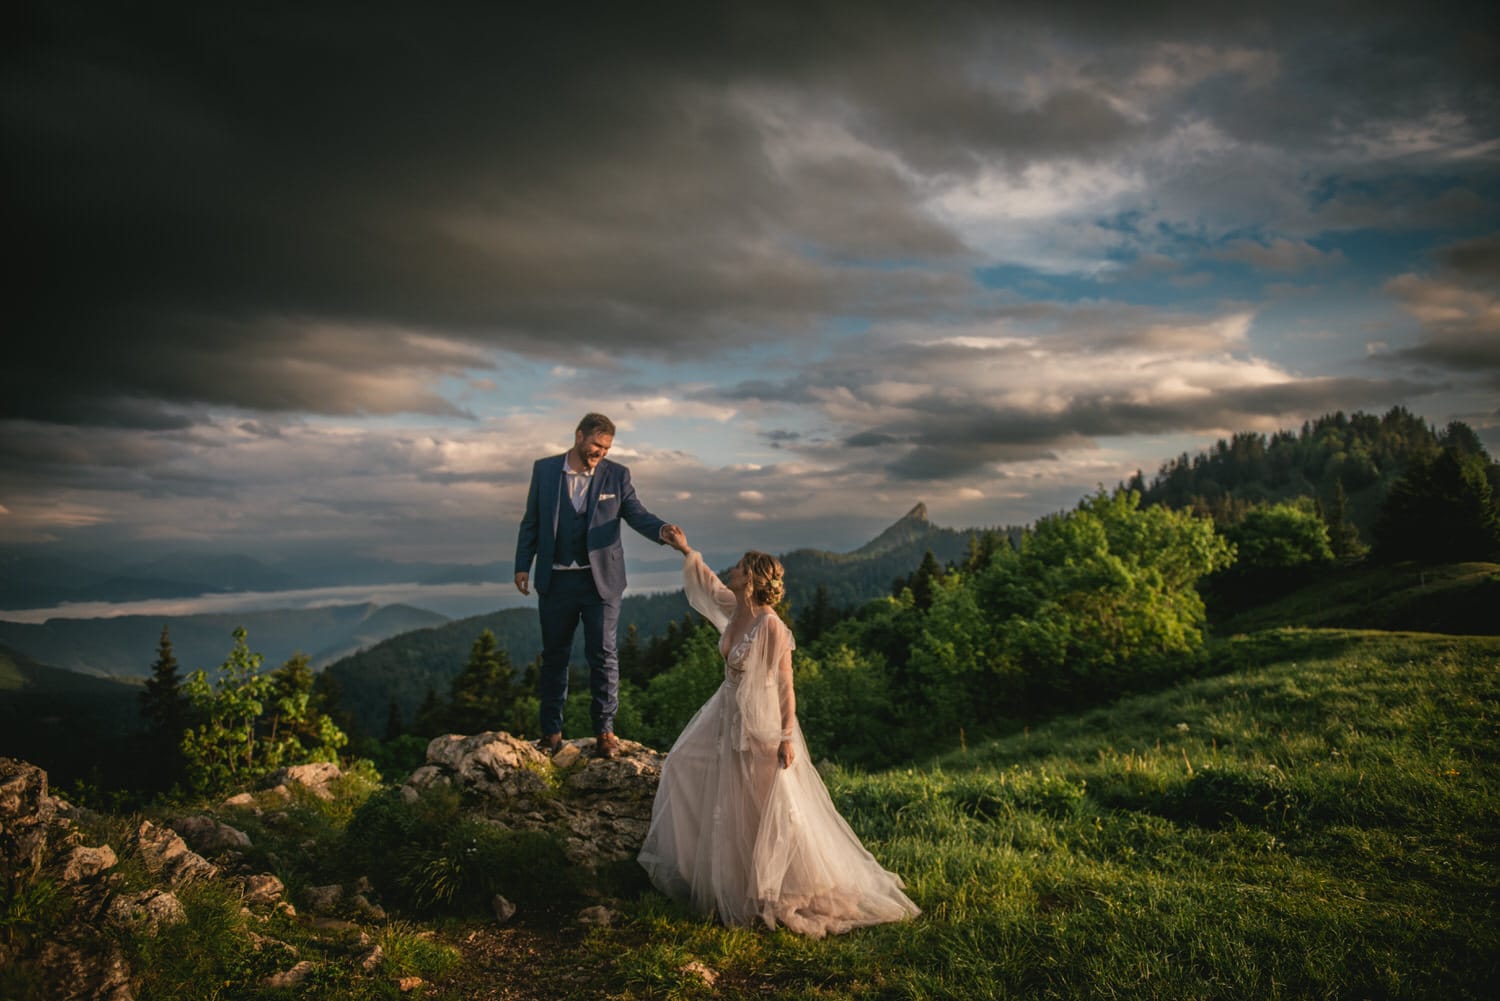 All-inclusive option for an adventure elopement package